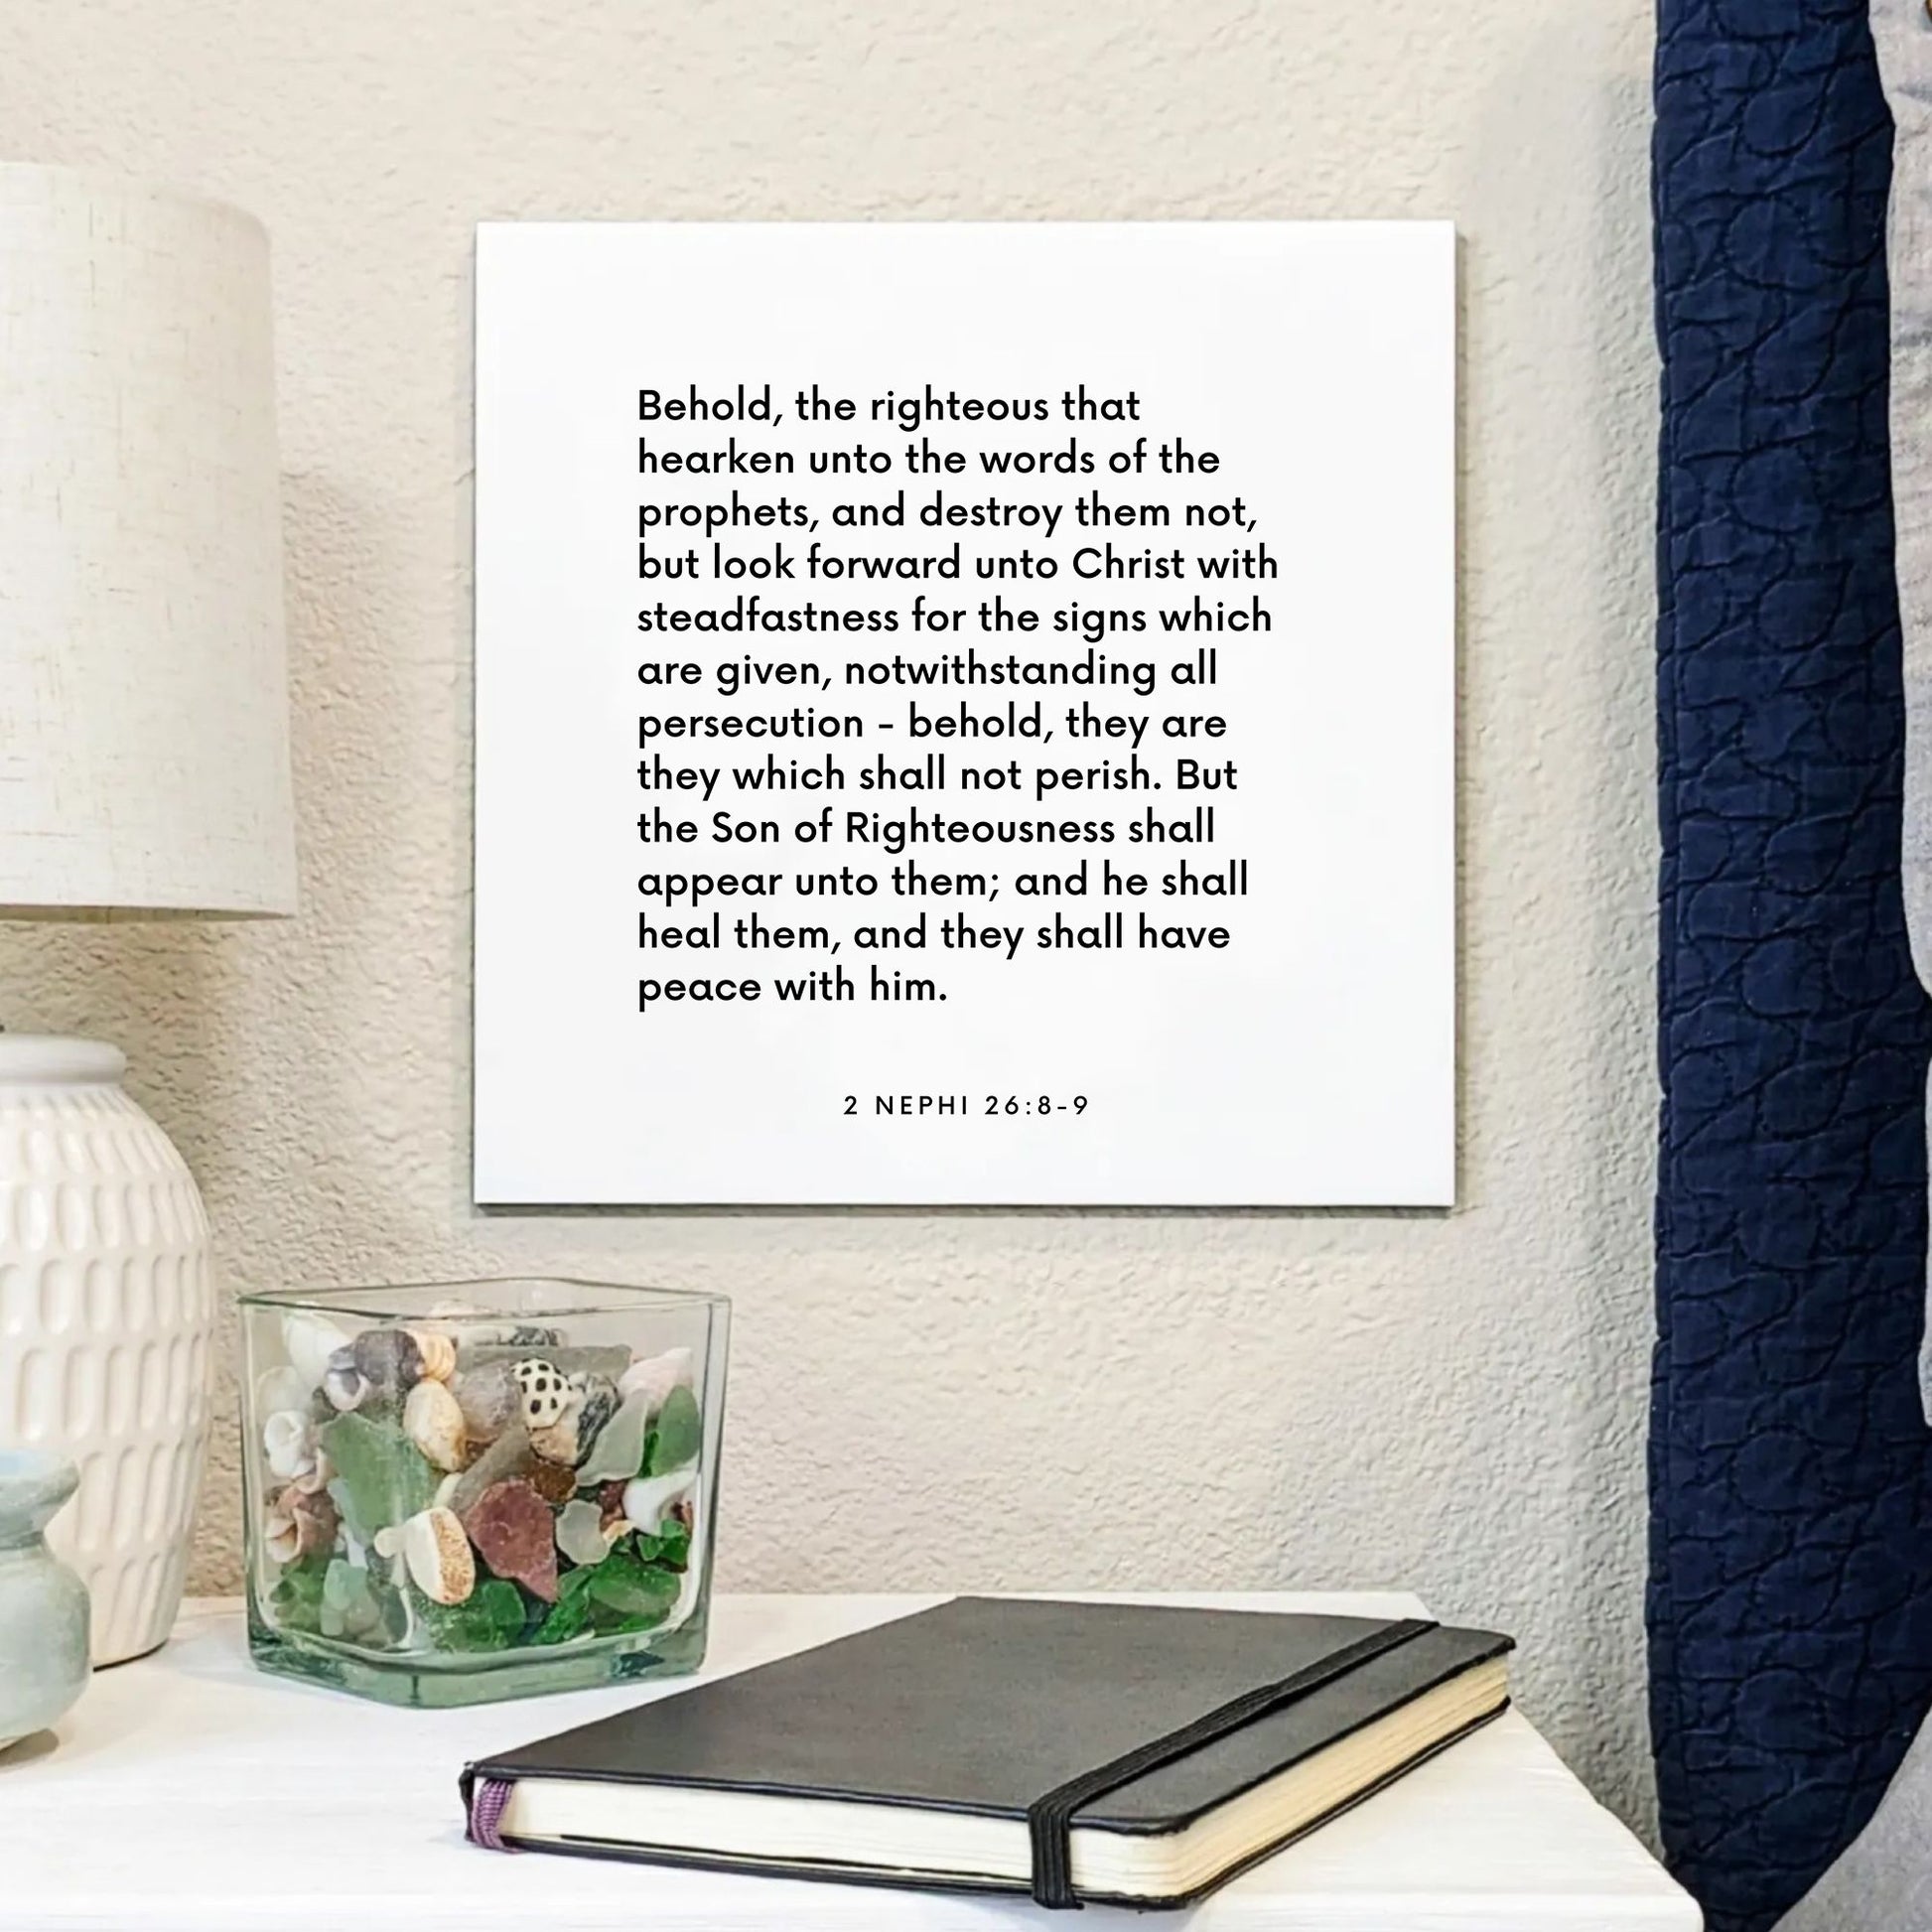 Bedside mouting of the scripture tile for 2 Nephi 26:8-9 - "Look forward unto Christ with steadfastness"